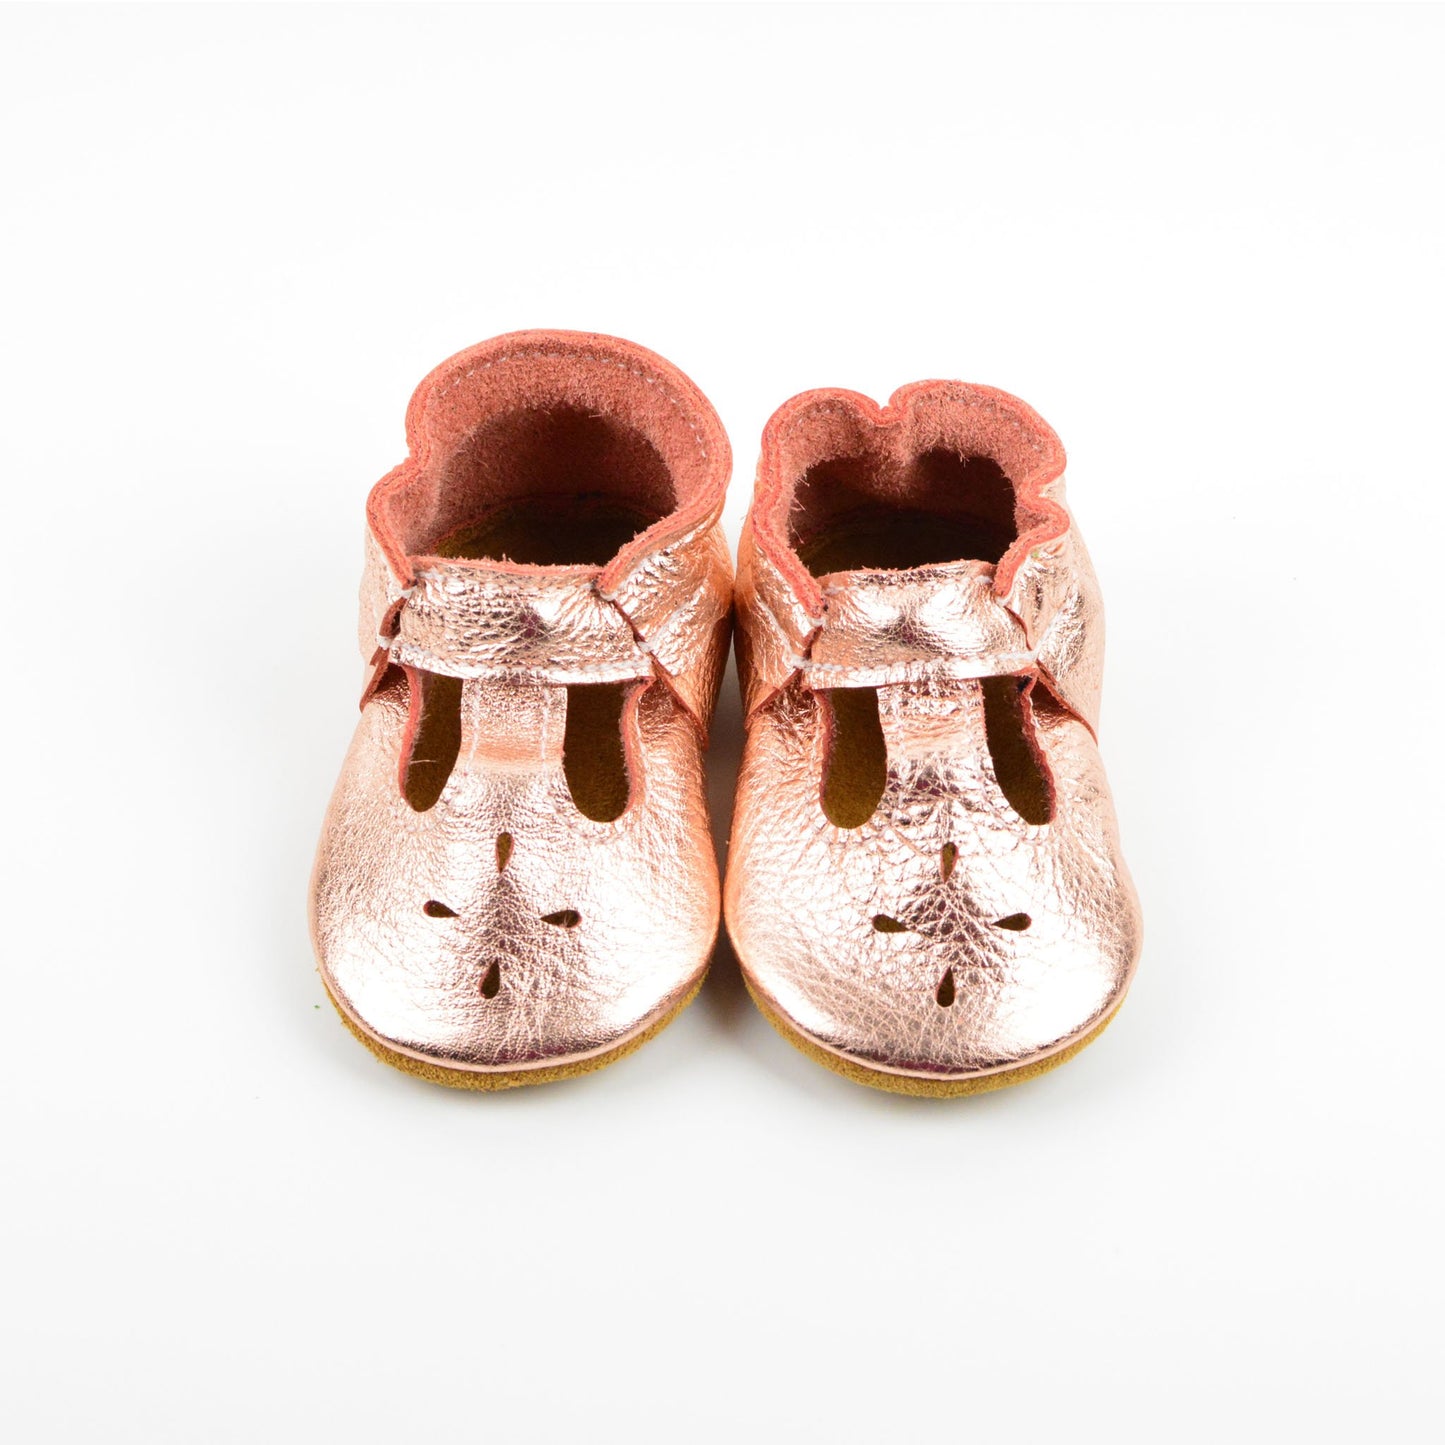 RTS Rose Gold T-straps With Tan Suede Leather Soles - Size 3 (12-18M)(5")